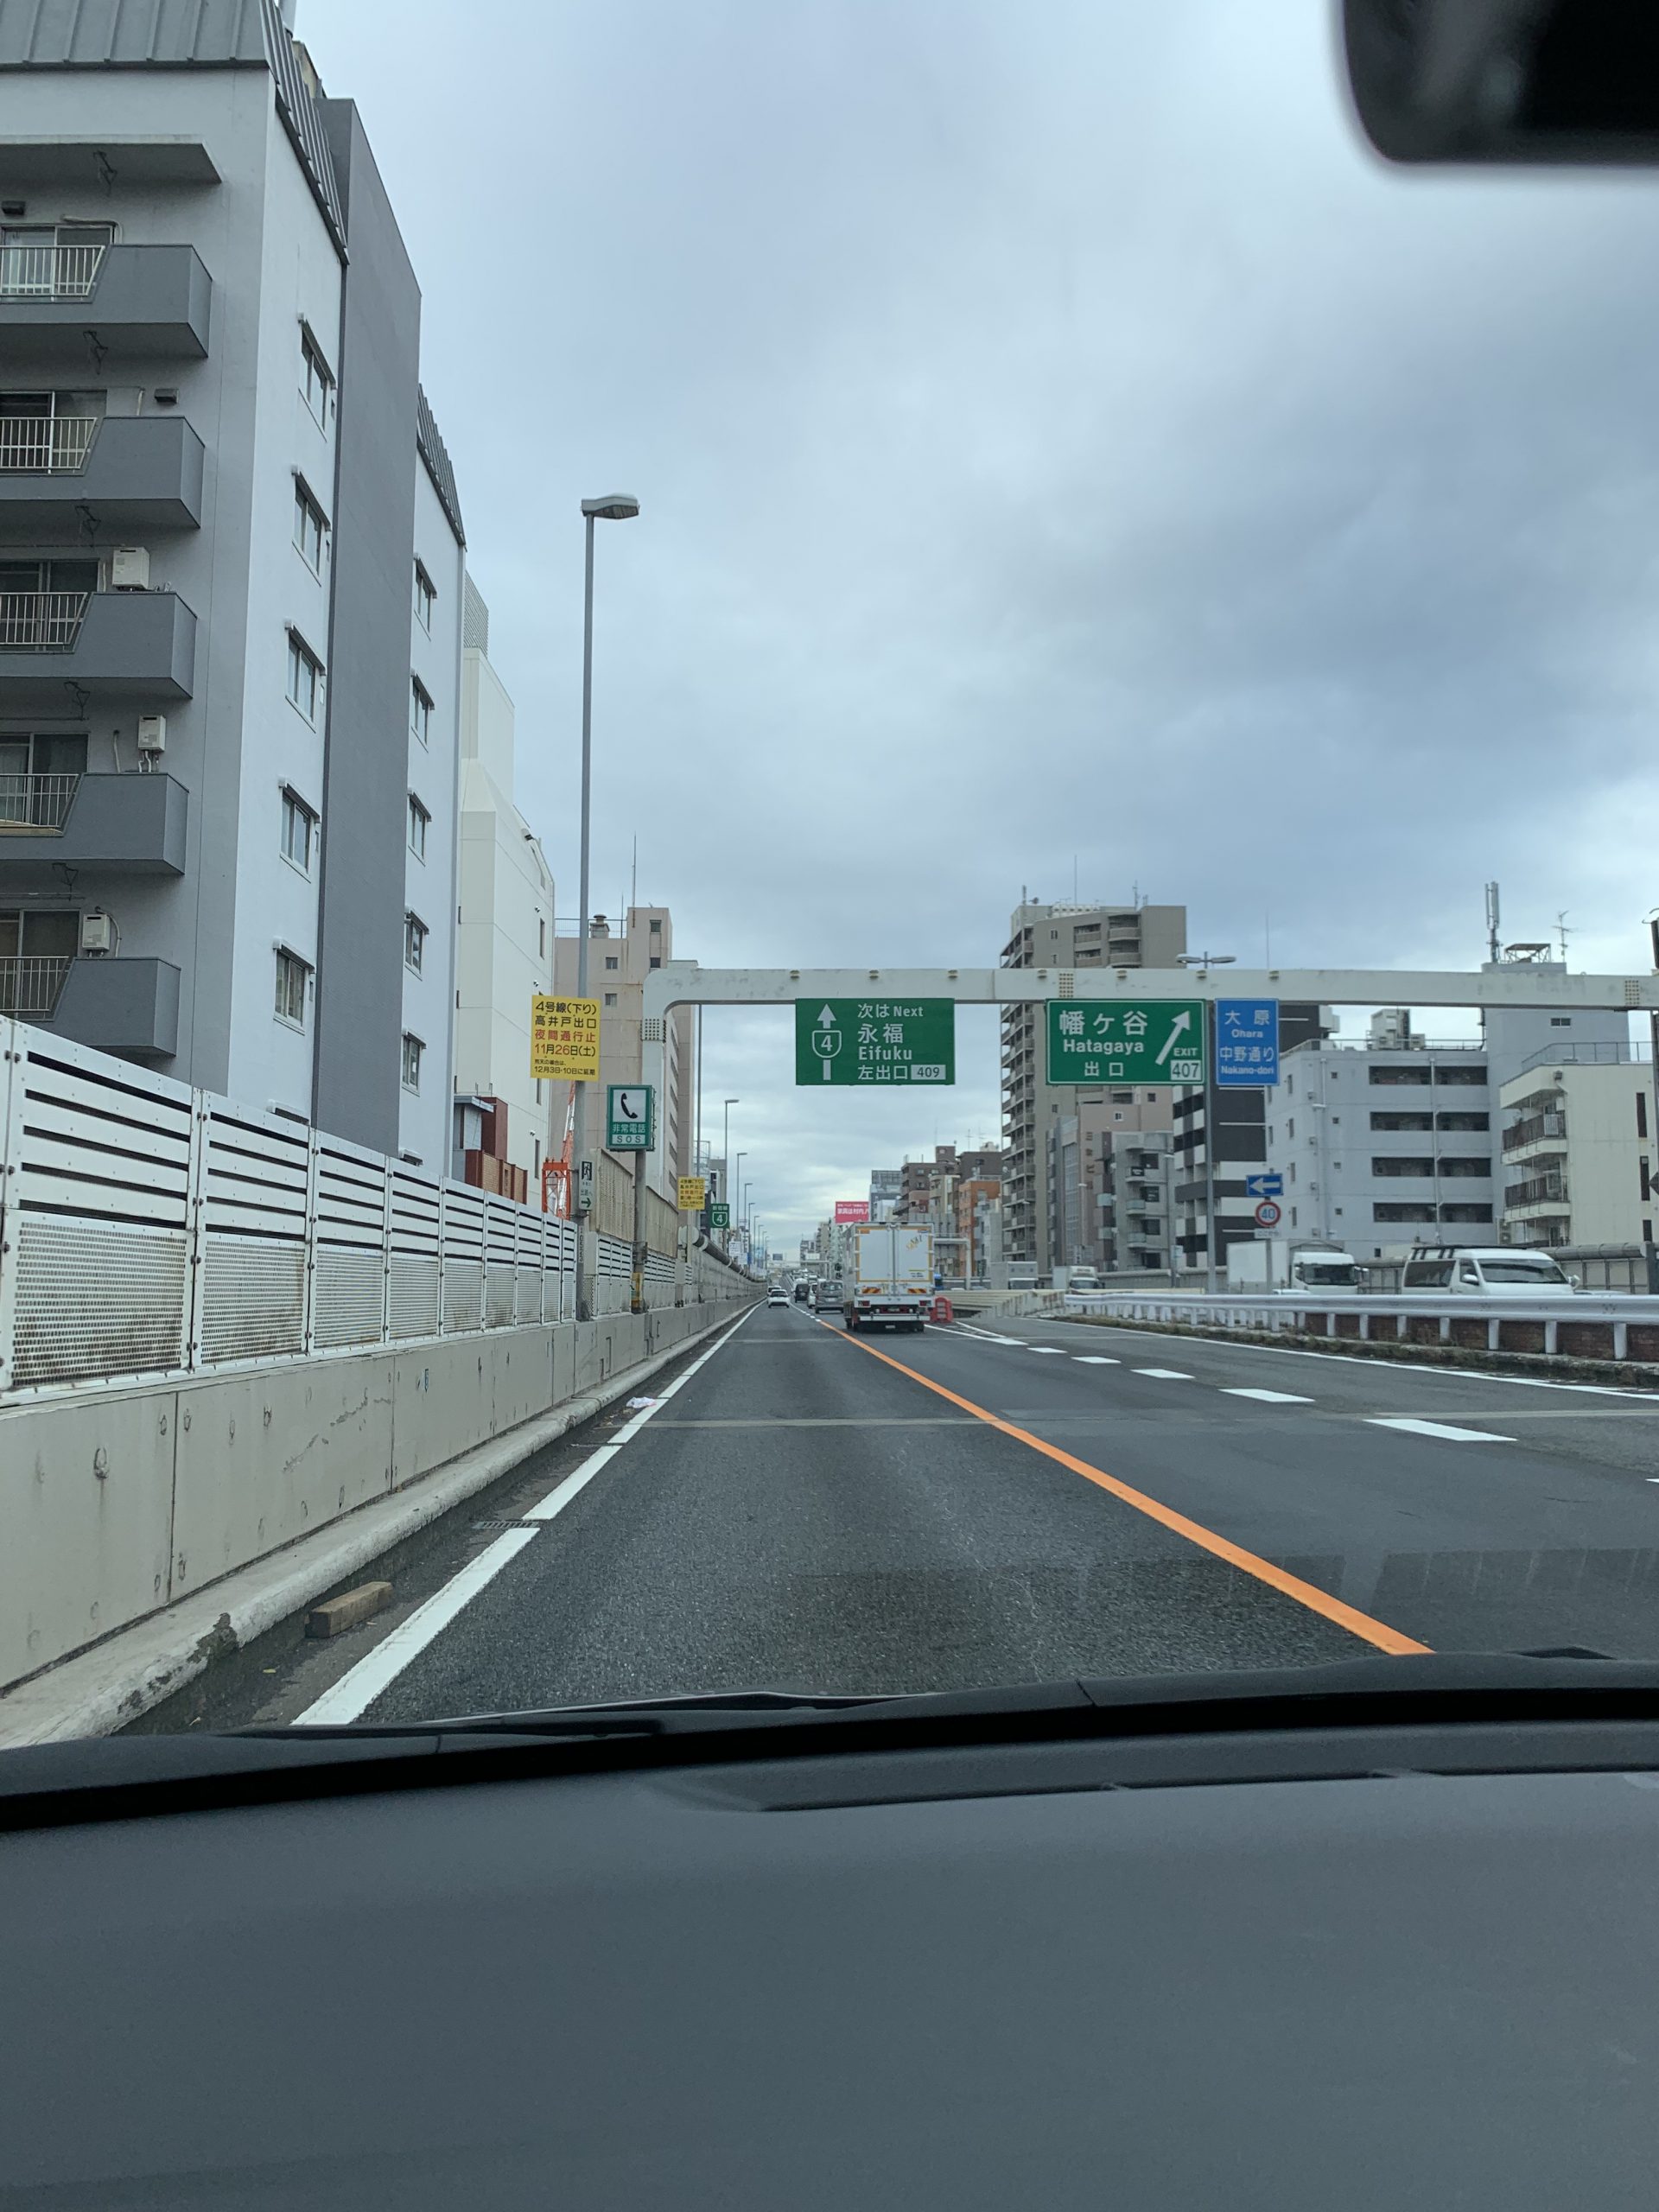 Driving in Tokyo, Japan - urban roads and traffic